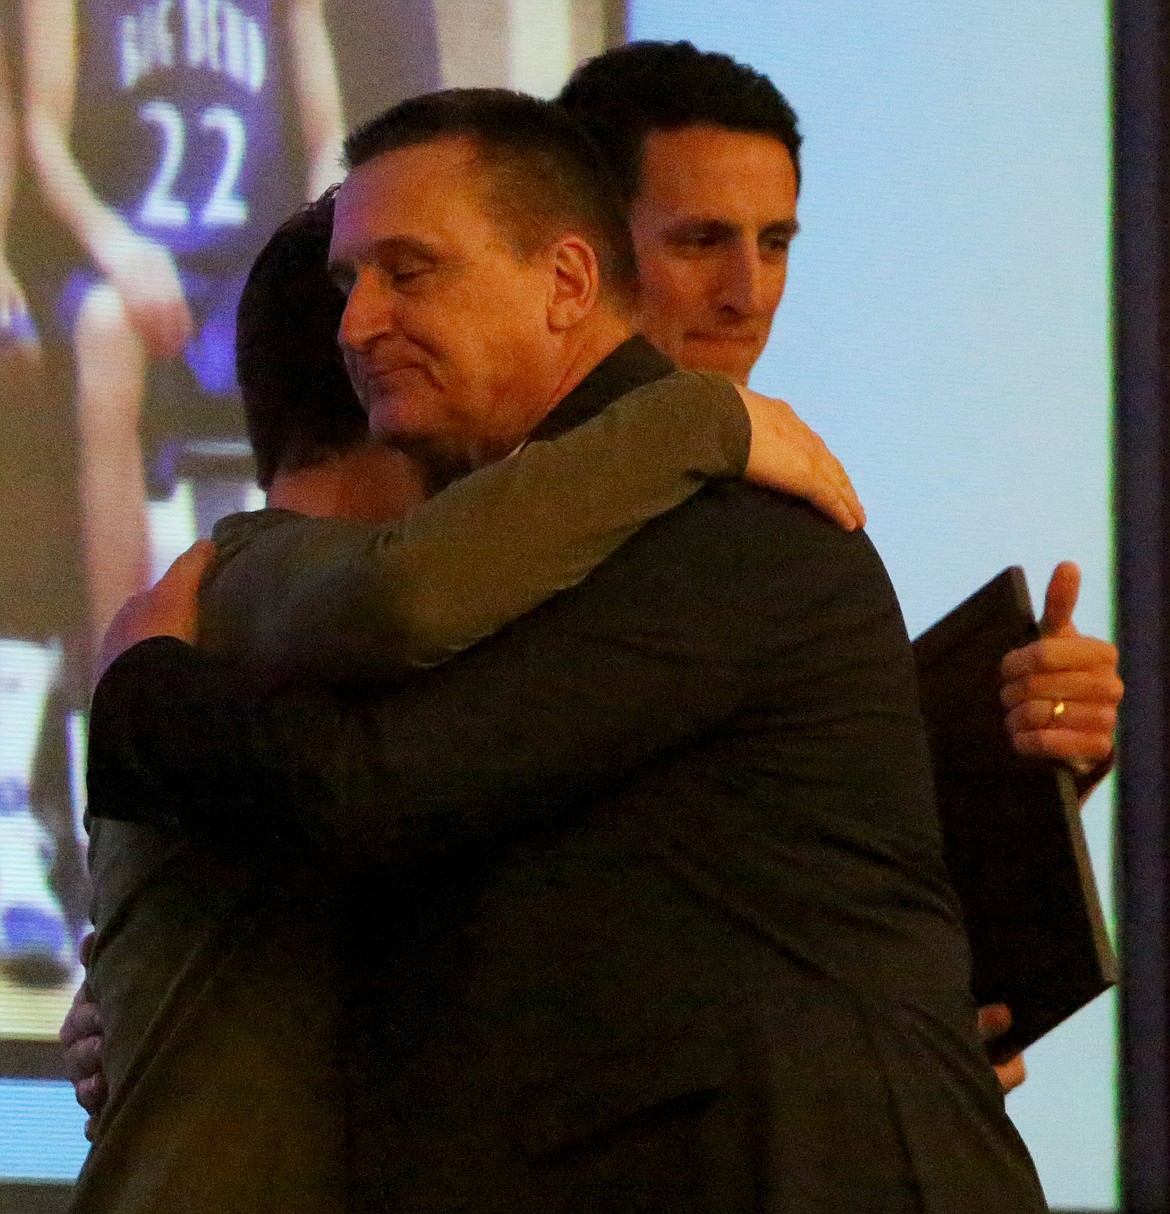 Mark Poth embraces former player and assistant coach Spencer Pingel at the Big Bend Hall of Fame banquet.